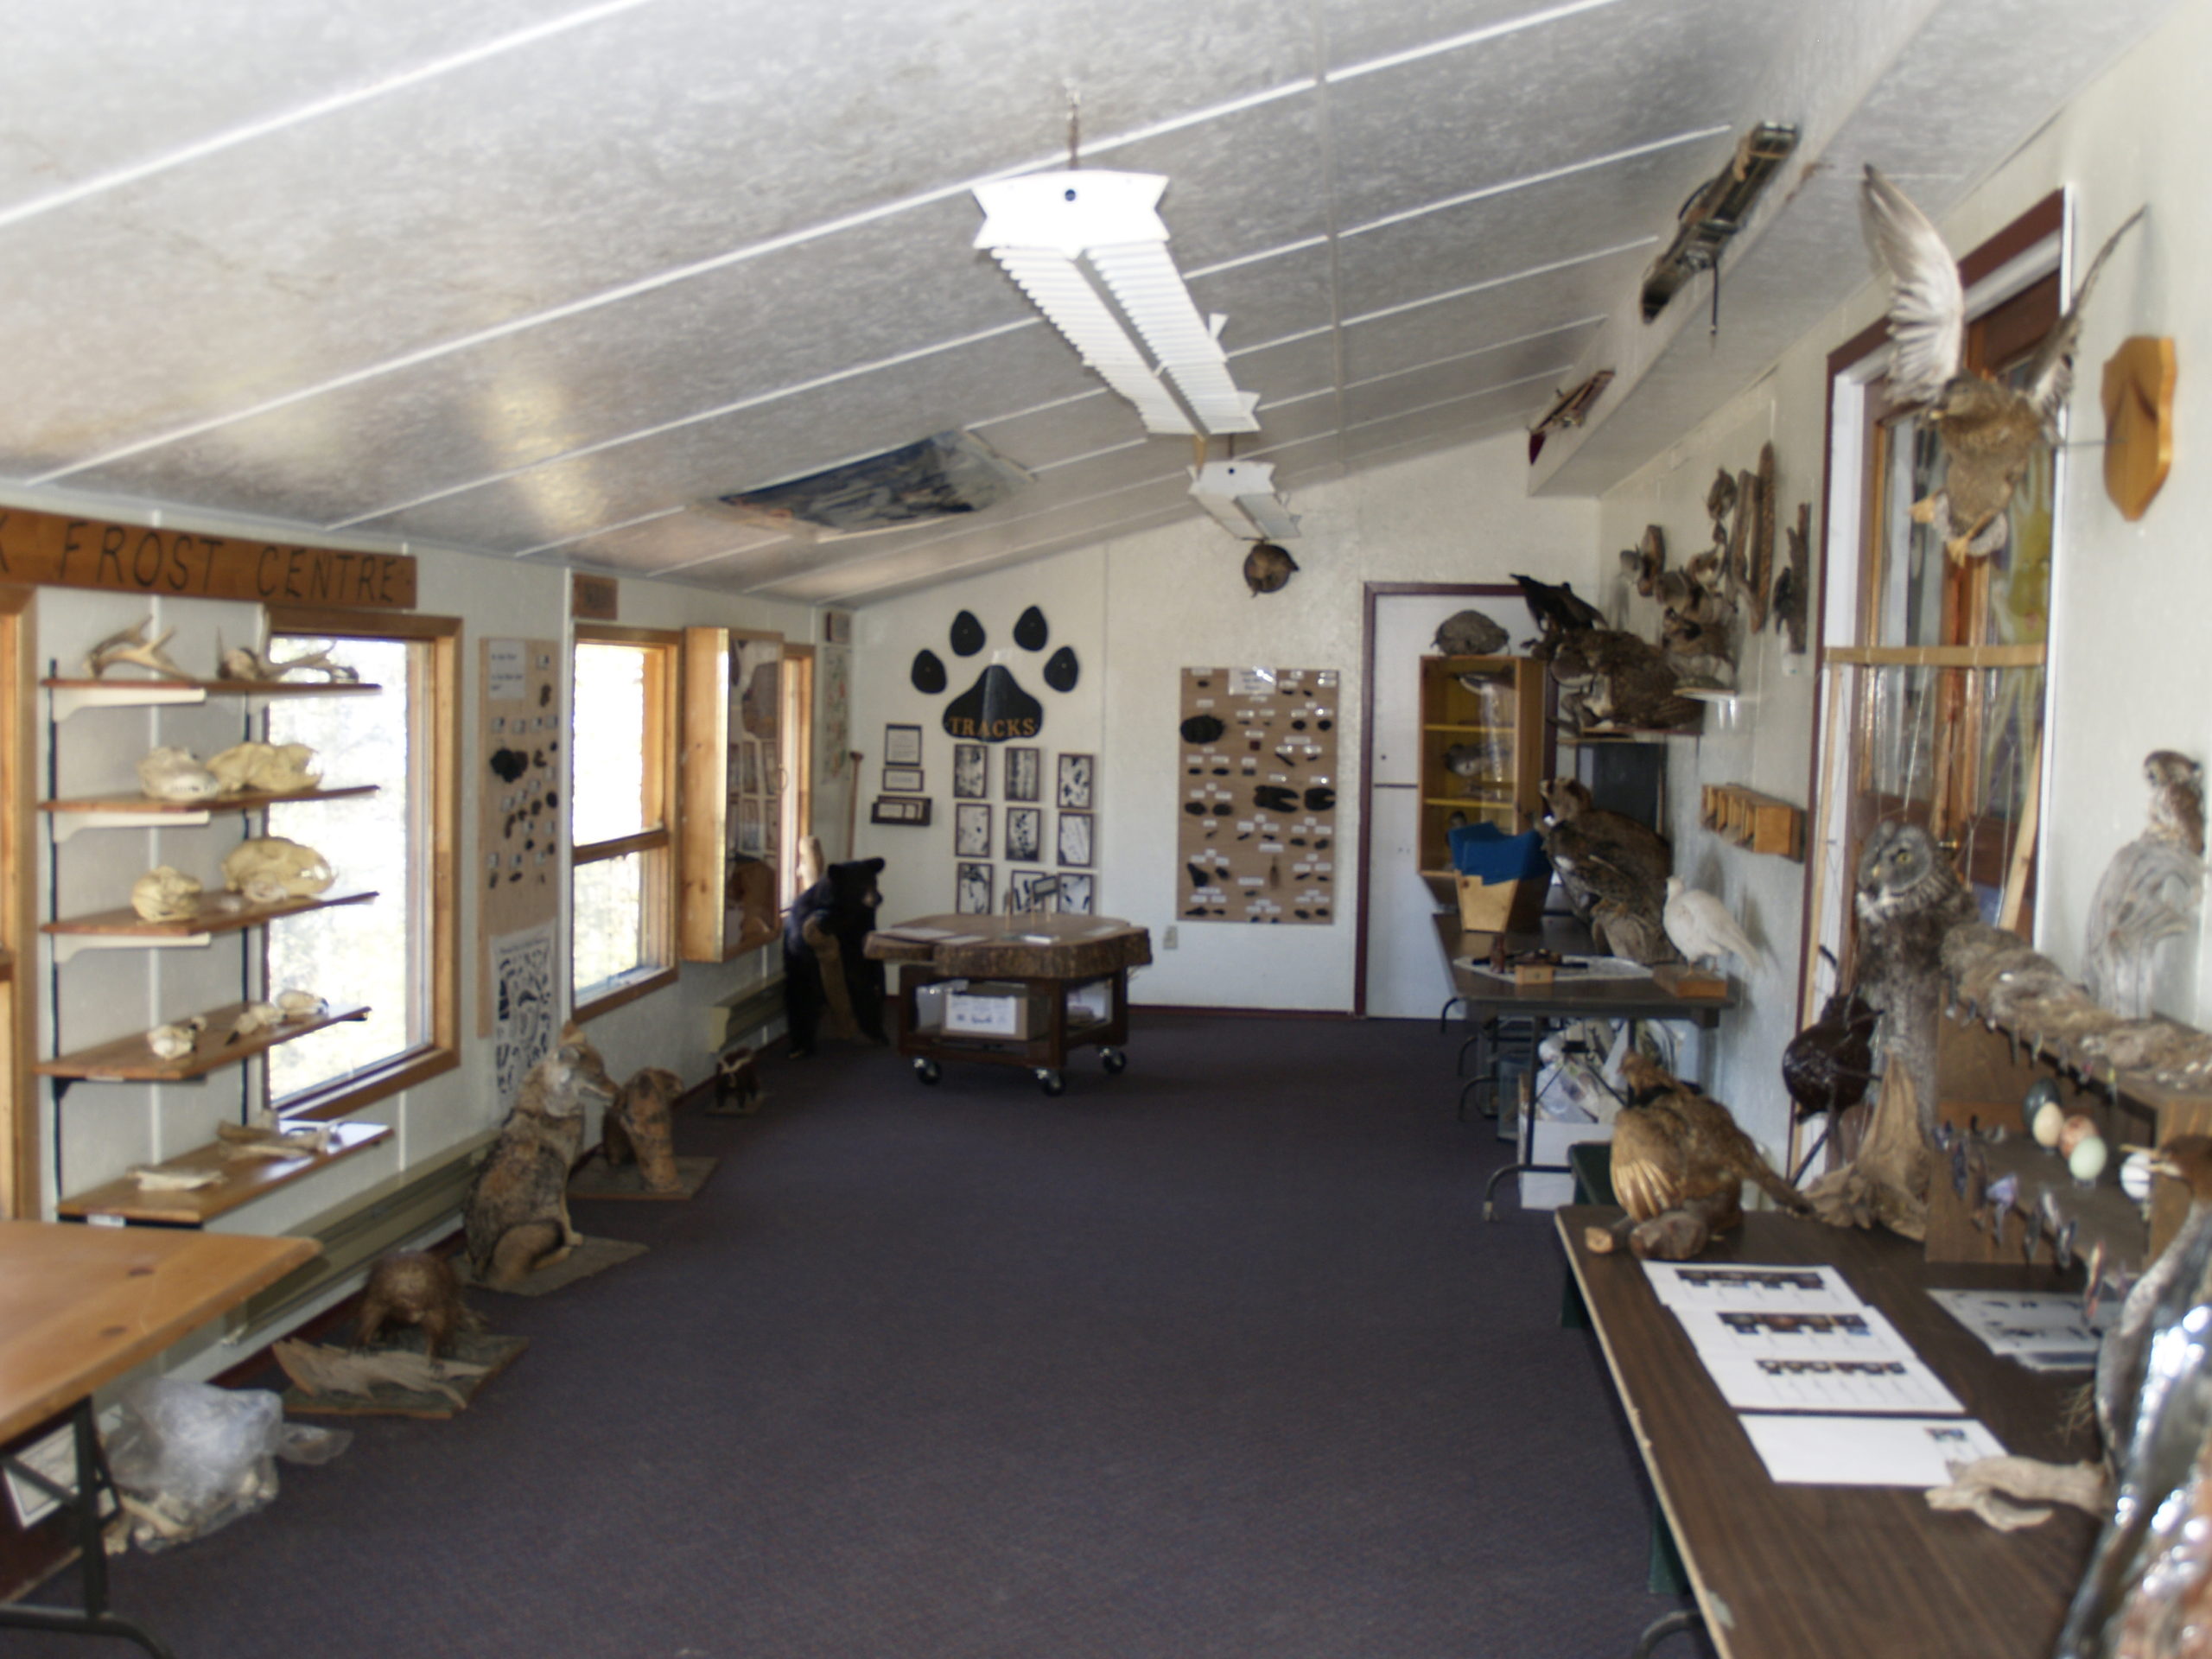 three walls of a room appear lined with fur and different trading pieces. a historic building that shows the act of trading.